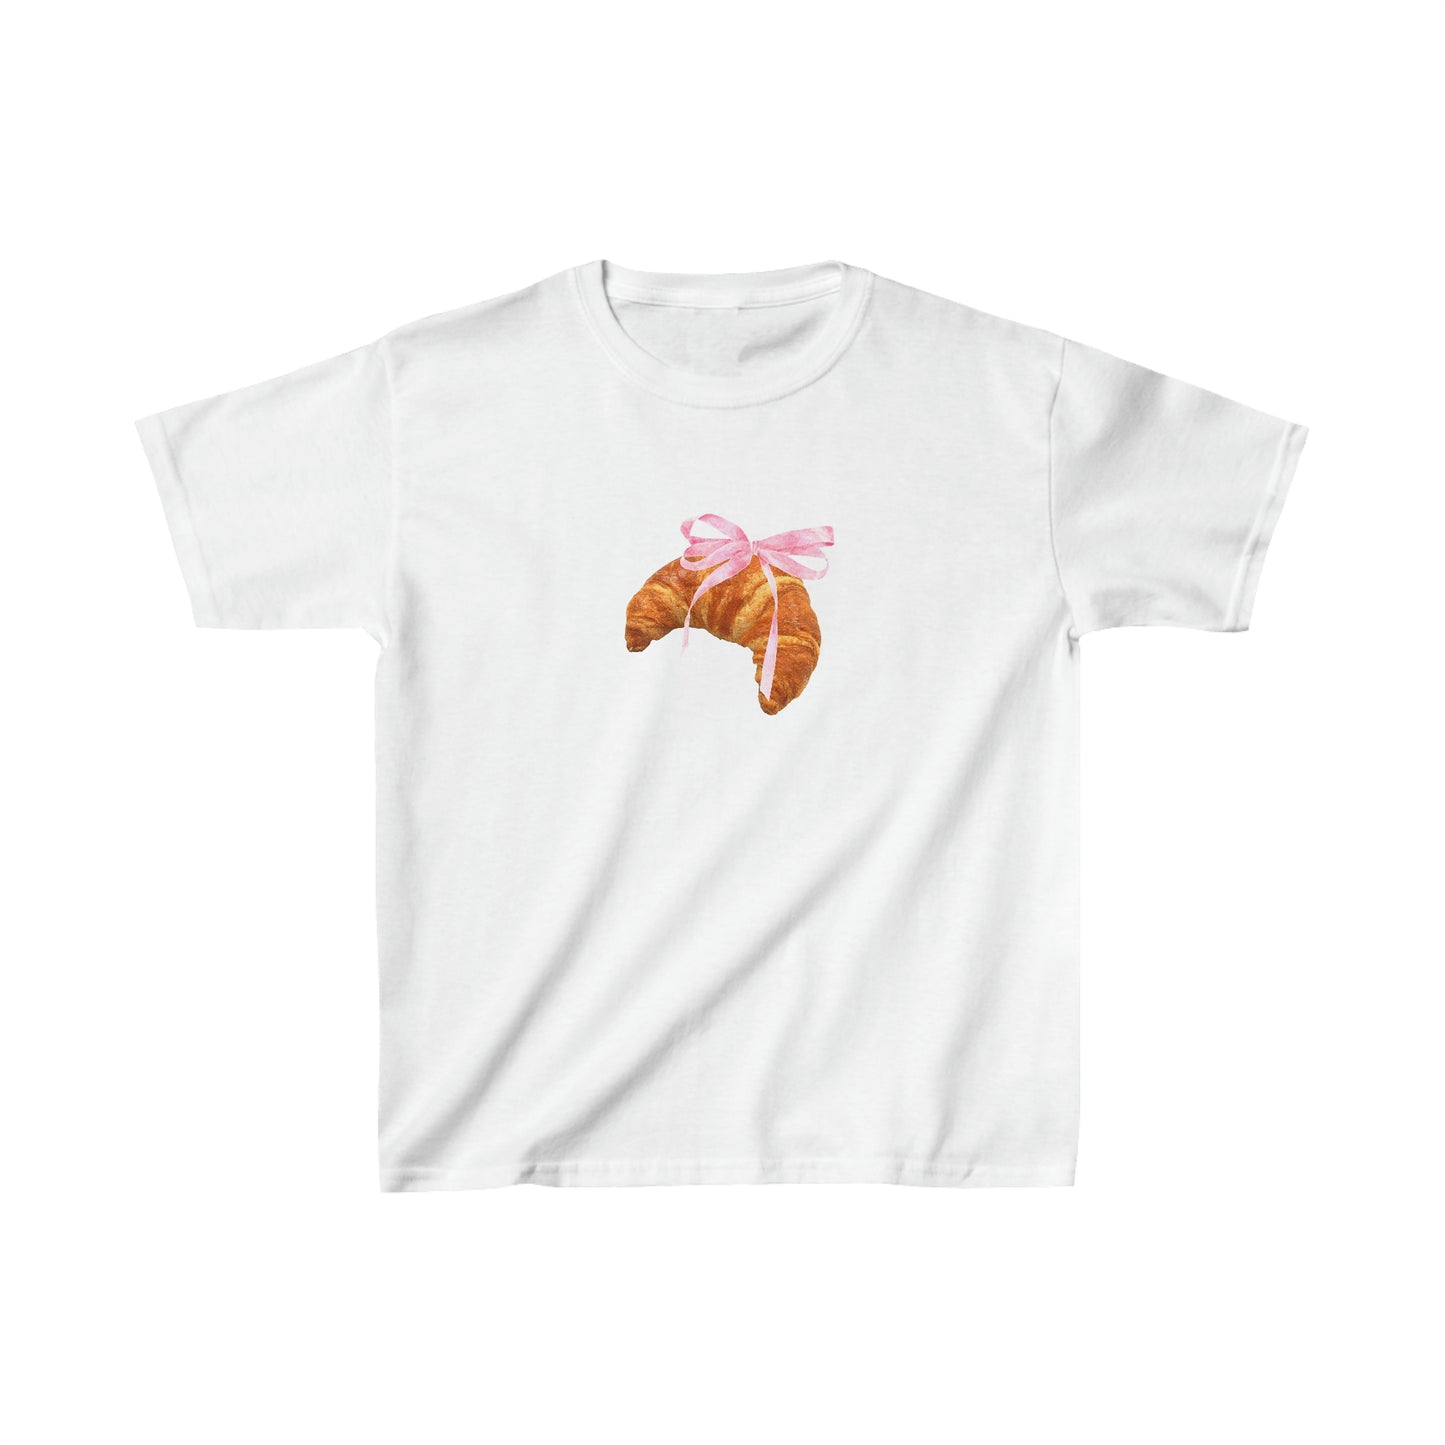 Coquette Croissant Baby Tee